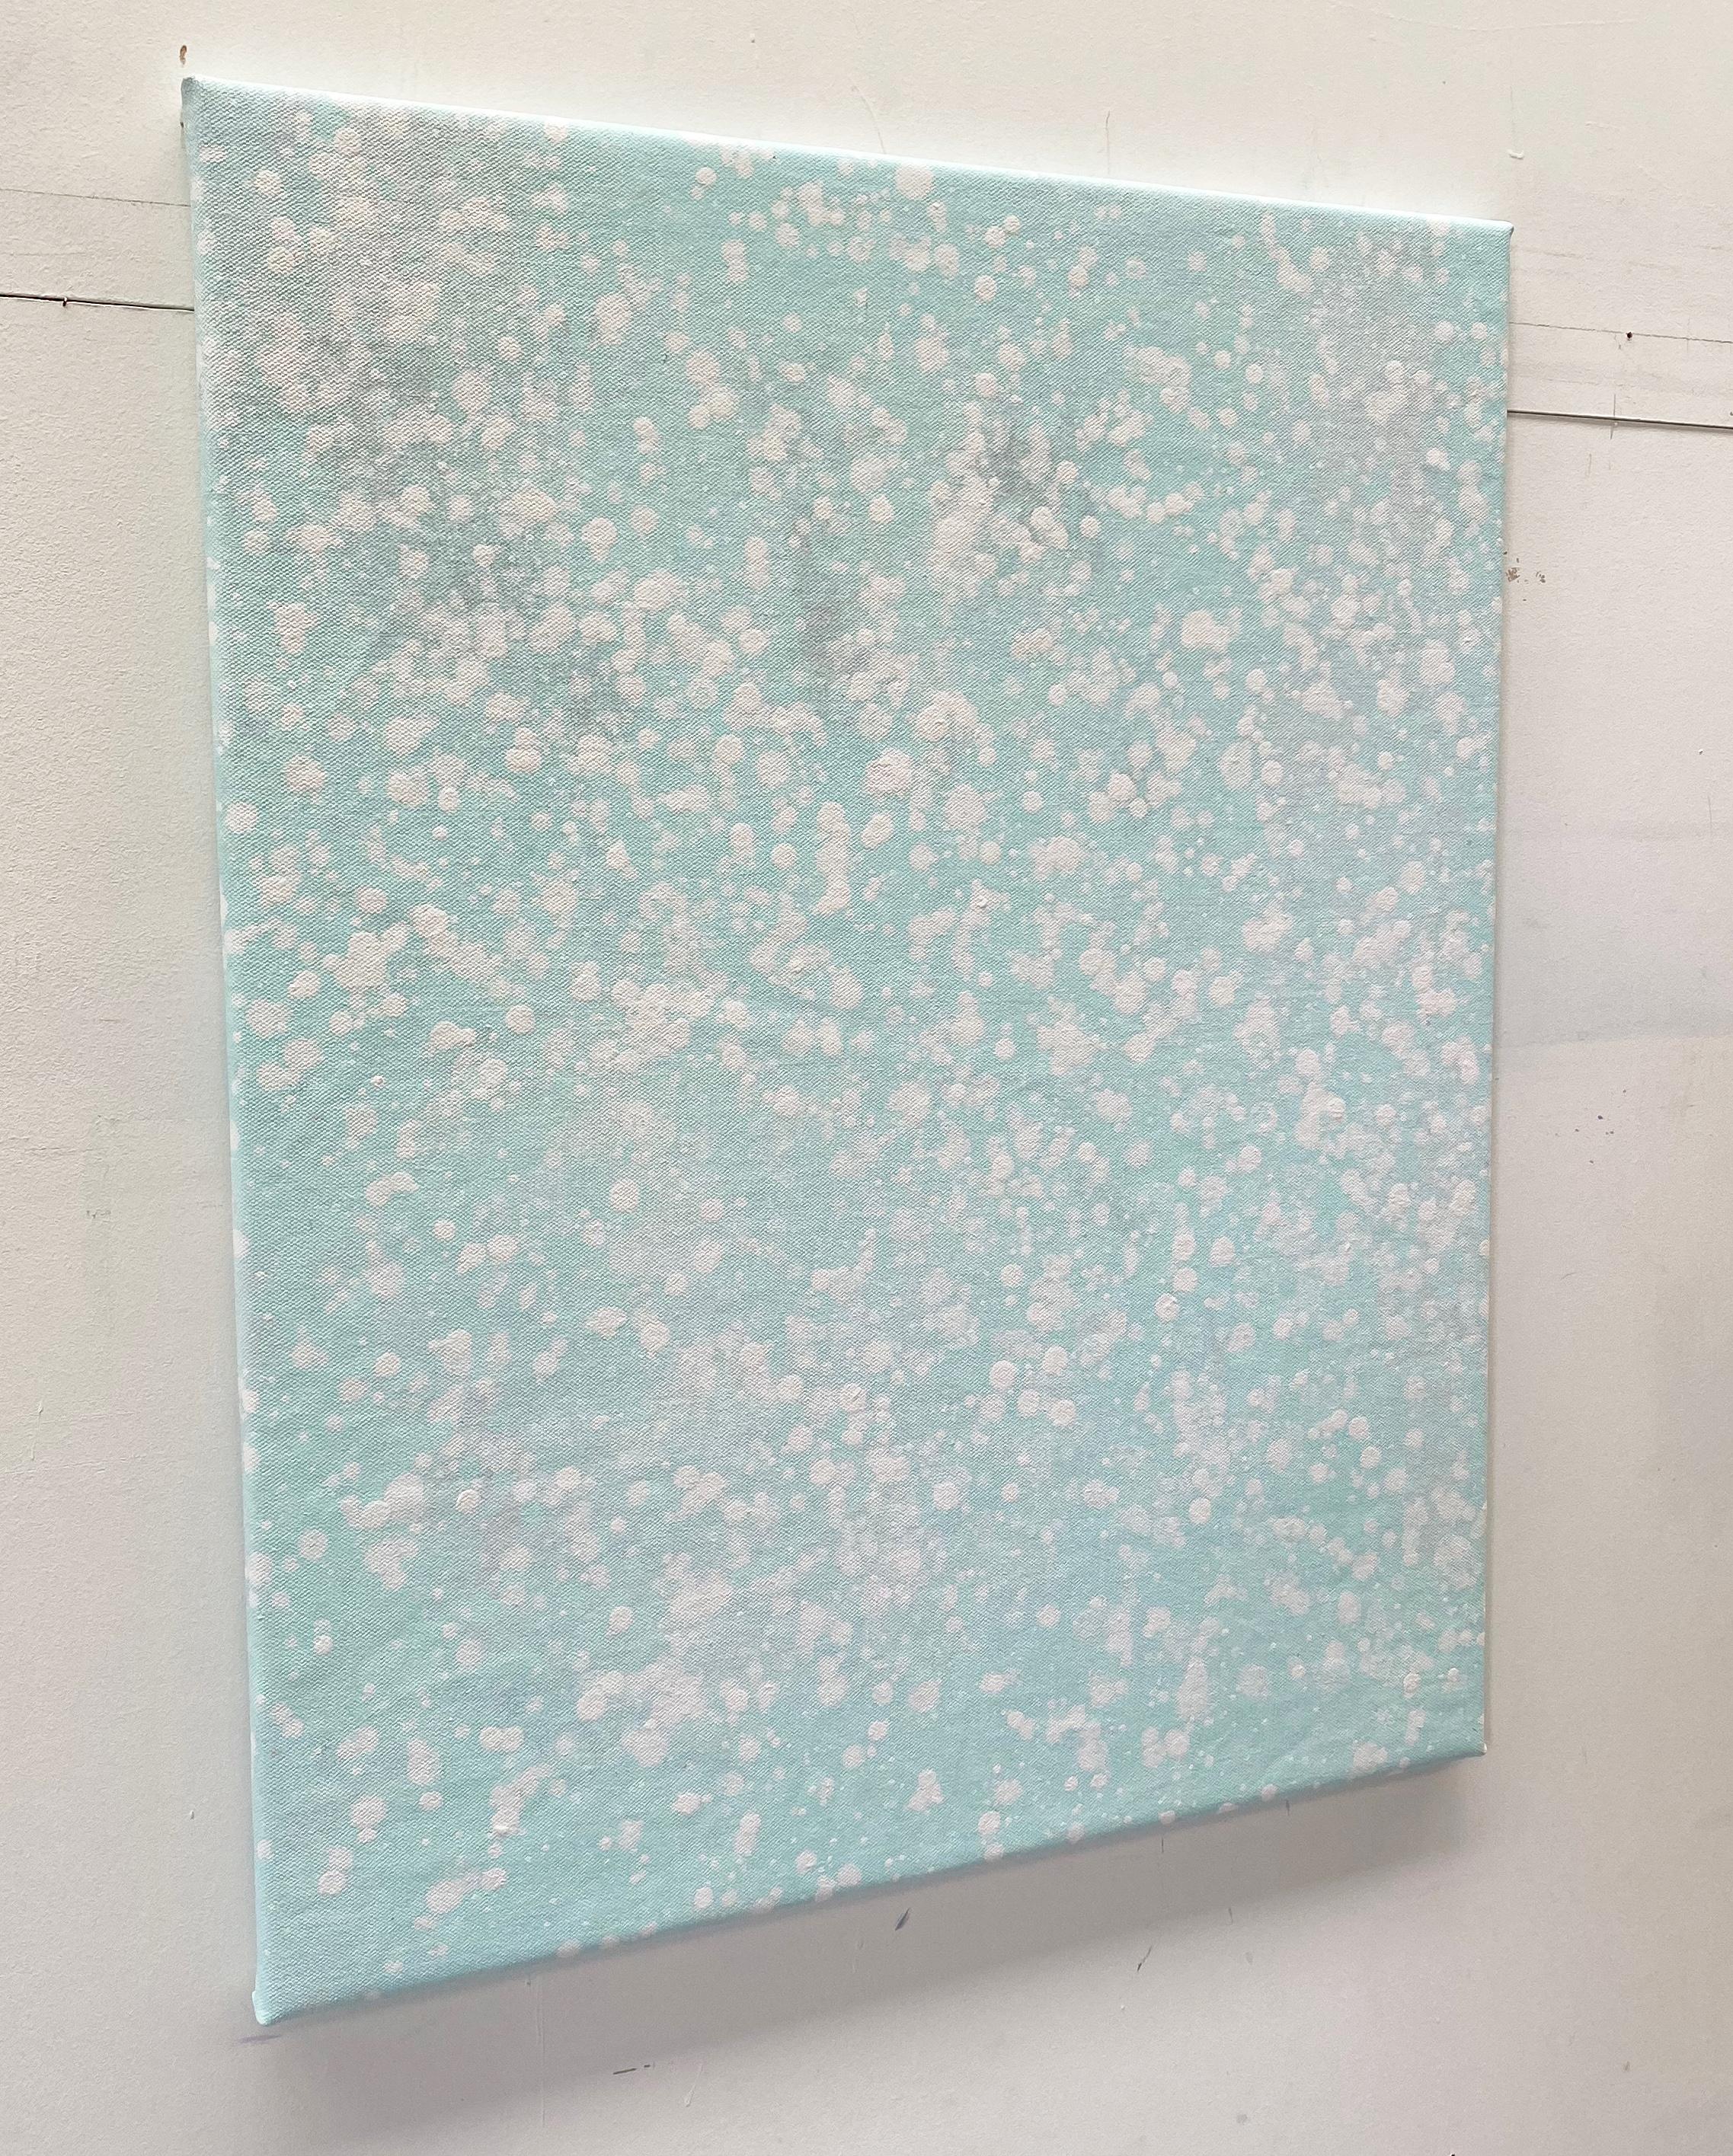 Its snowing pastel mint green dot abstract expressionist painting on linen 1